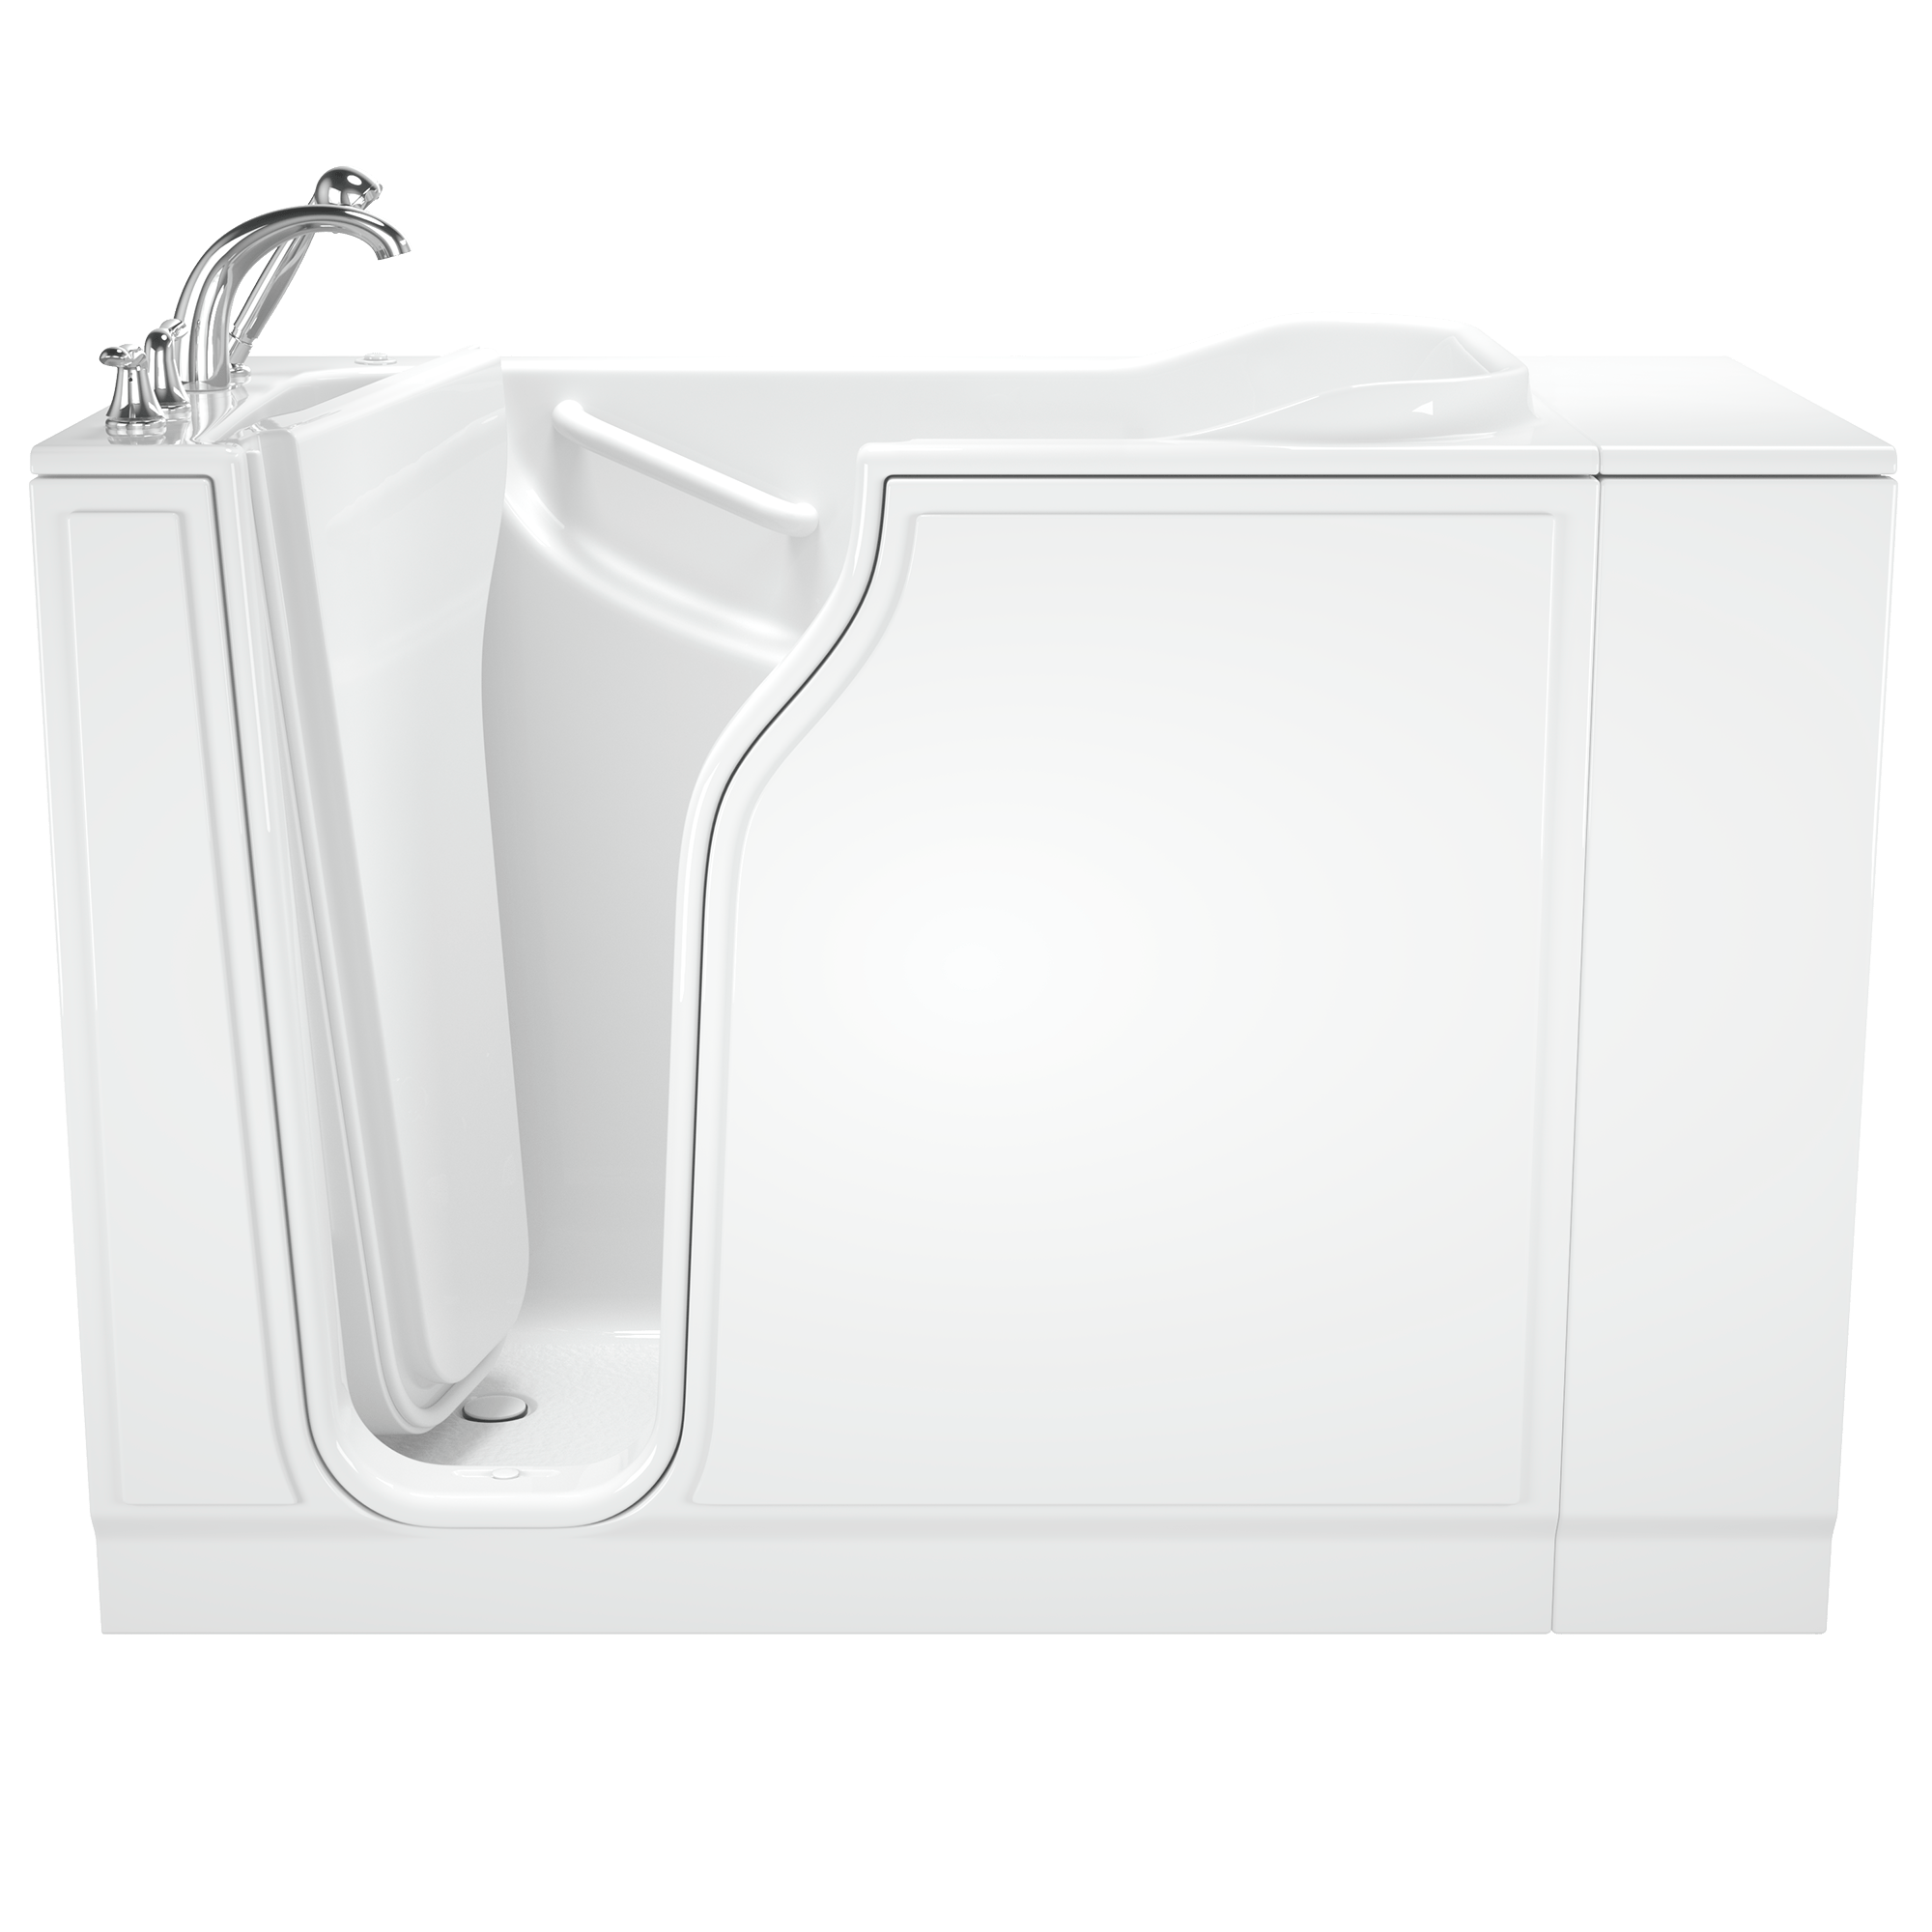 Gelcoat Entry Series 52 x 30-Inch Walk-In Tub With Air Spa System – Left-Hand Drain With Faucet